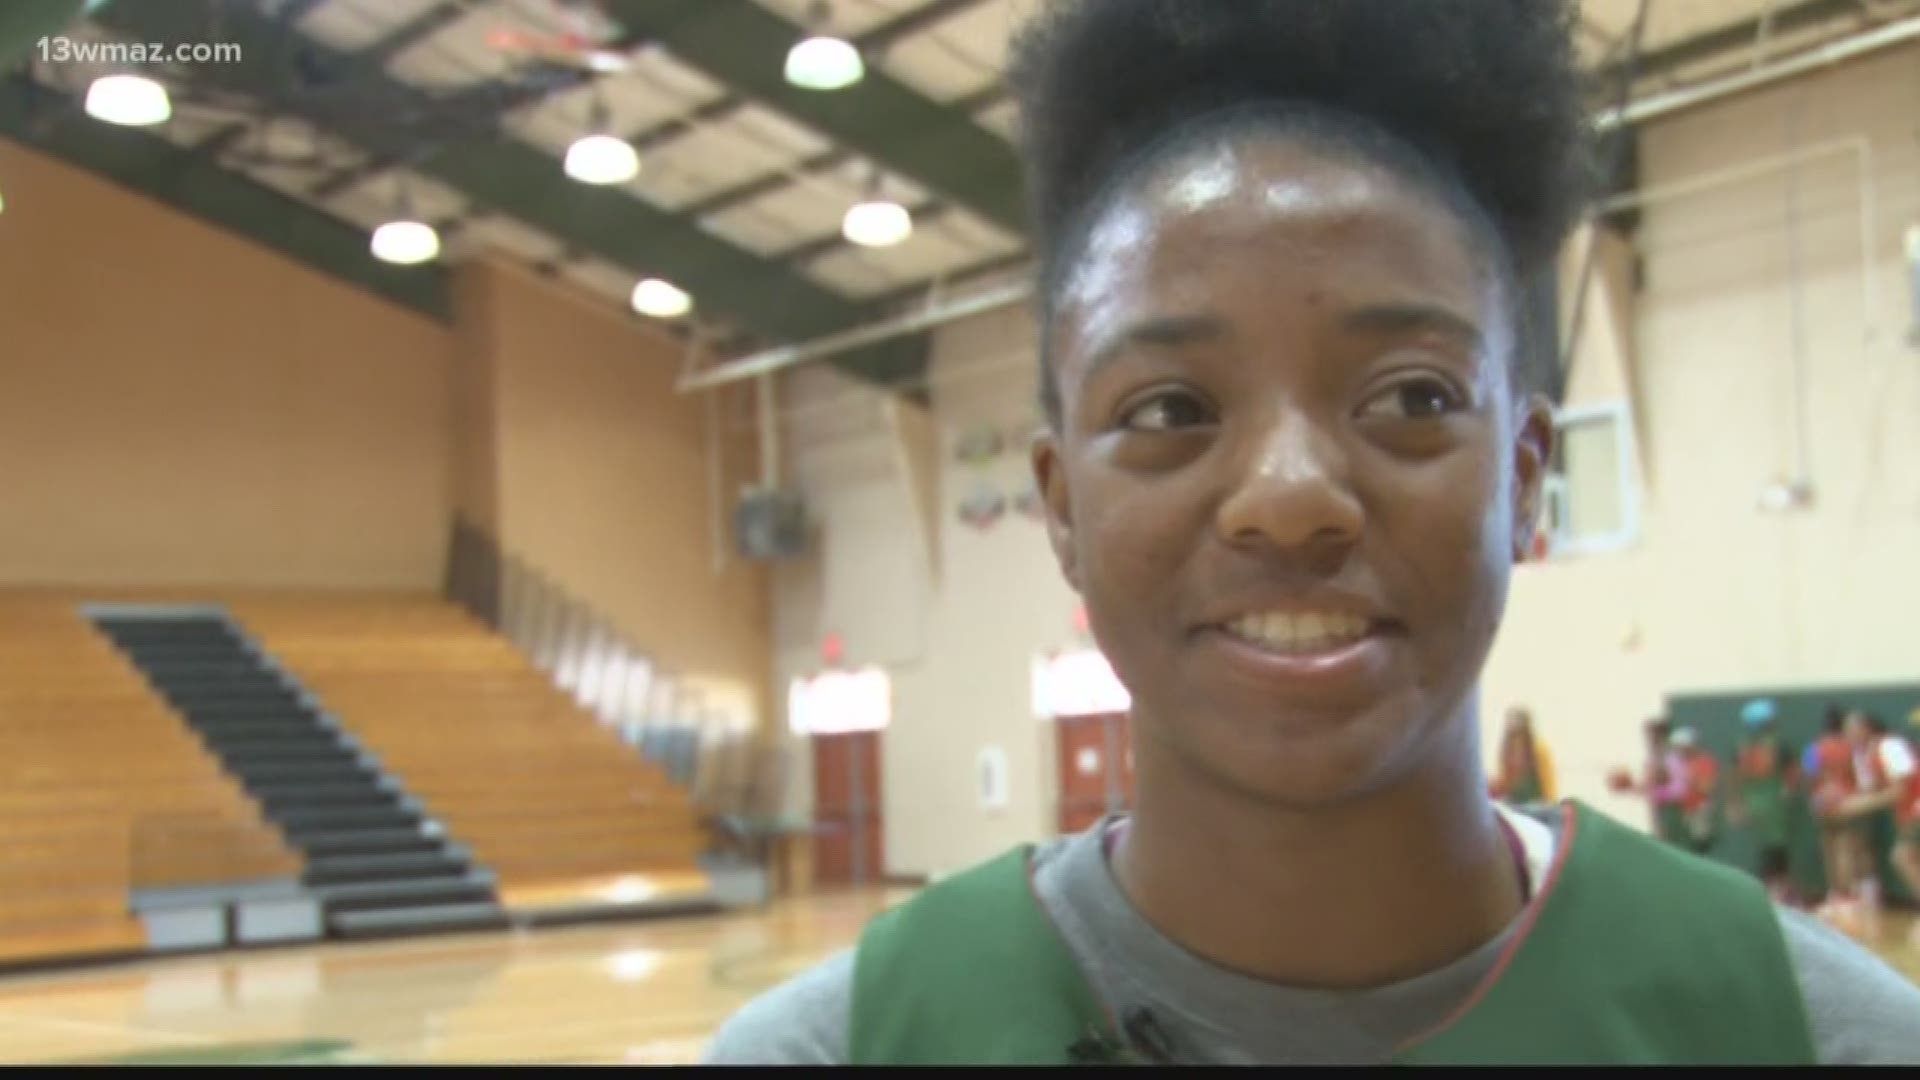 Bre'Asia has had a standout career at Rutland as both a decorated All-State shortstop for the softball team and just recently broke the school's scoring record as the dynamic guard on the hardwood.